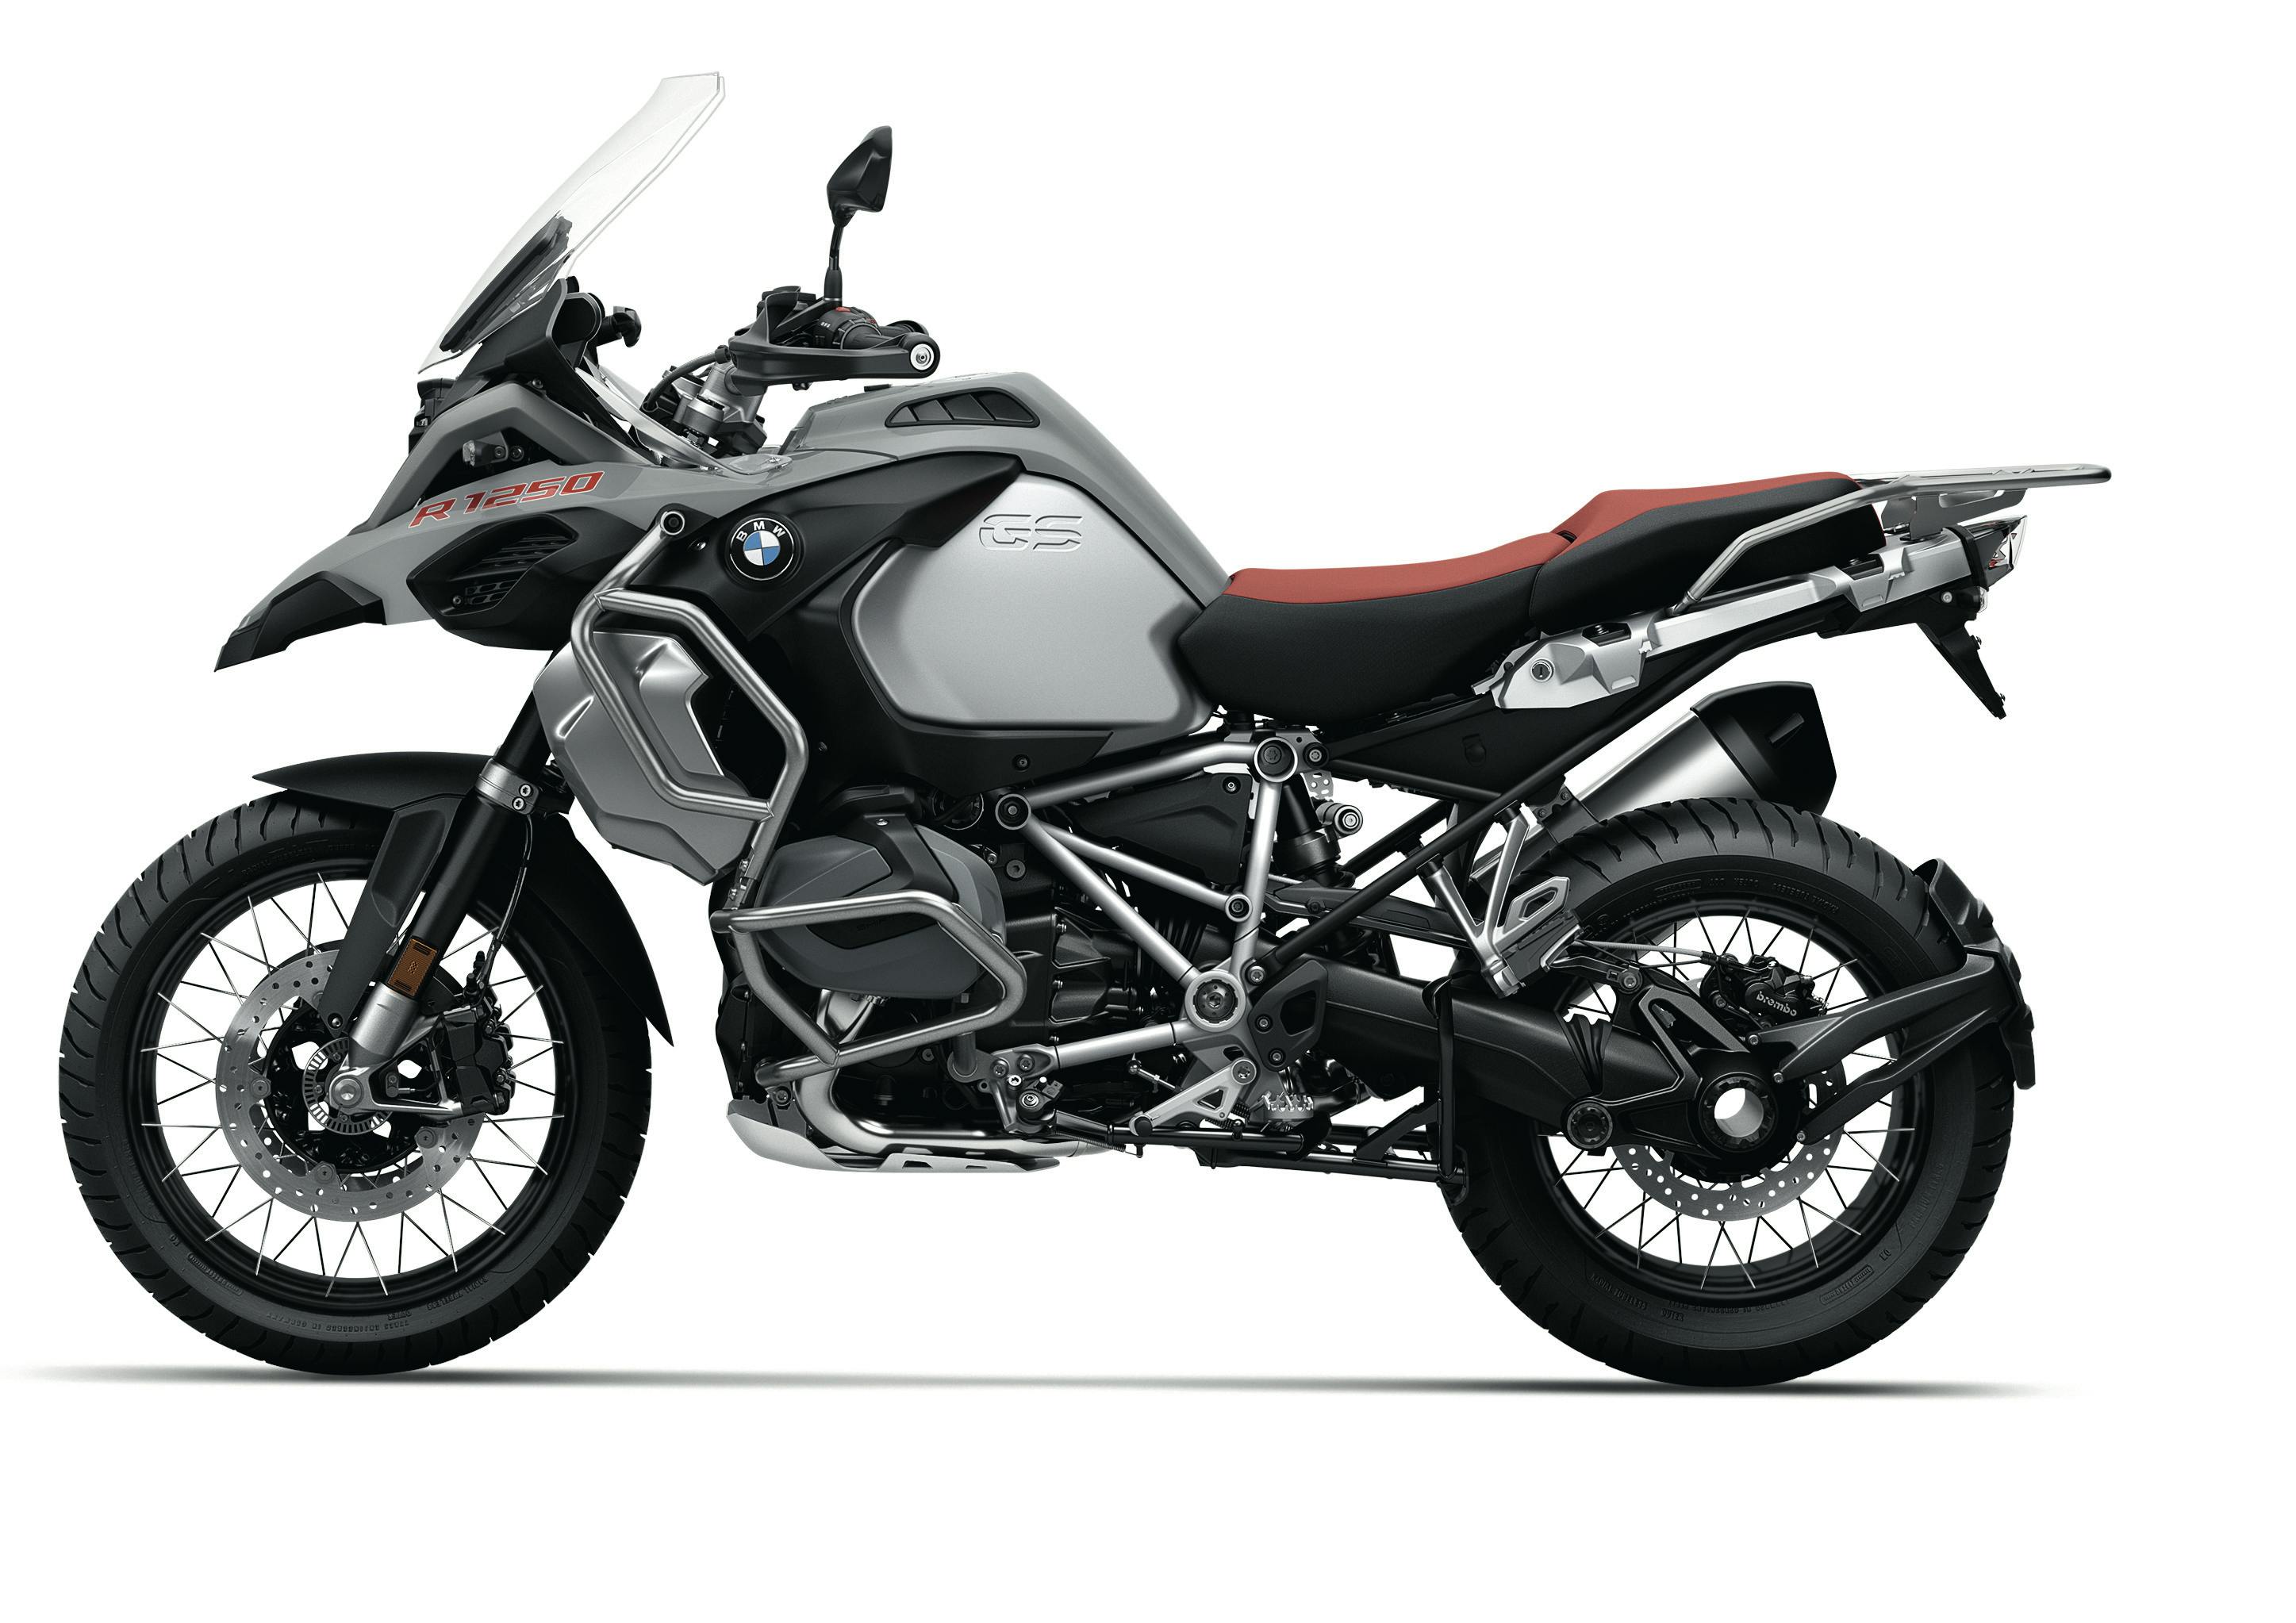 BMW R 1250 GS Adventure in ice grey colour